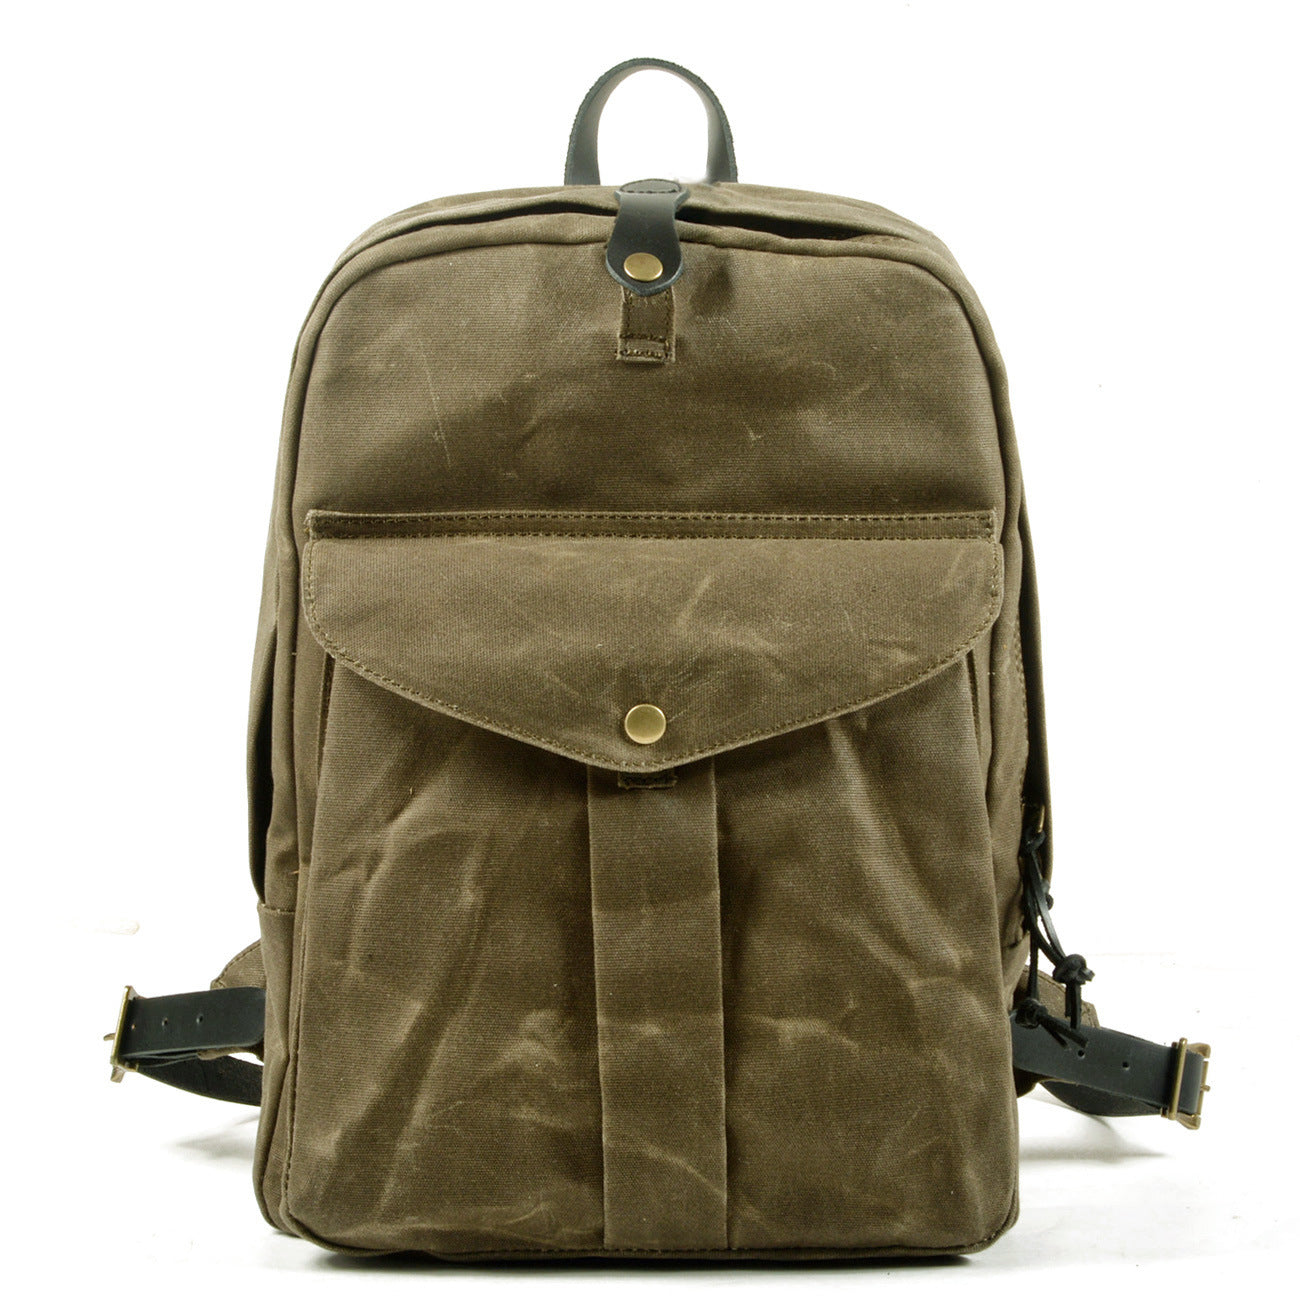 Vintage Water-resistant Canvas Hiking Backpack-Canvas Backpack-Army Green-Free Shipping Leatheretro